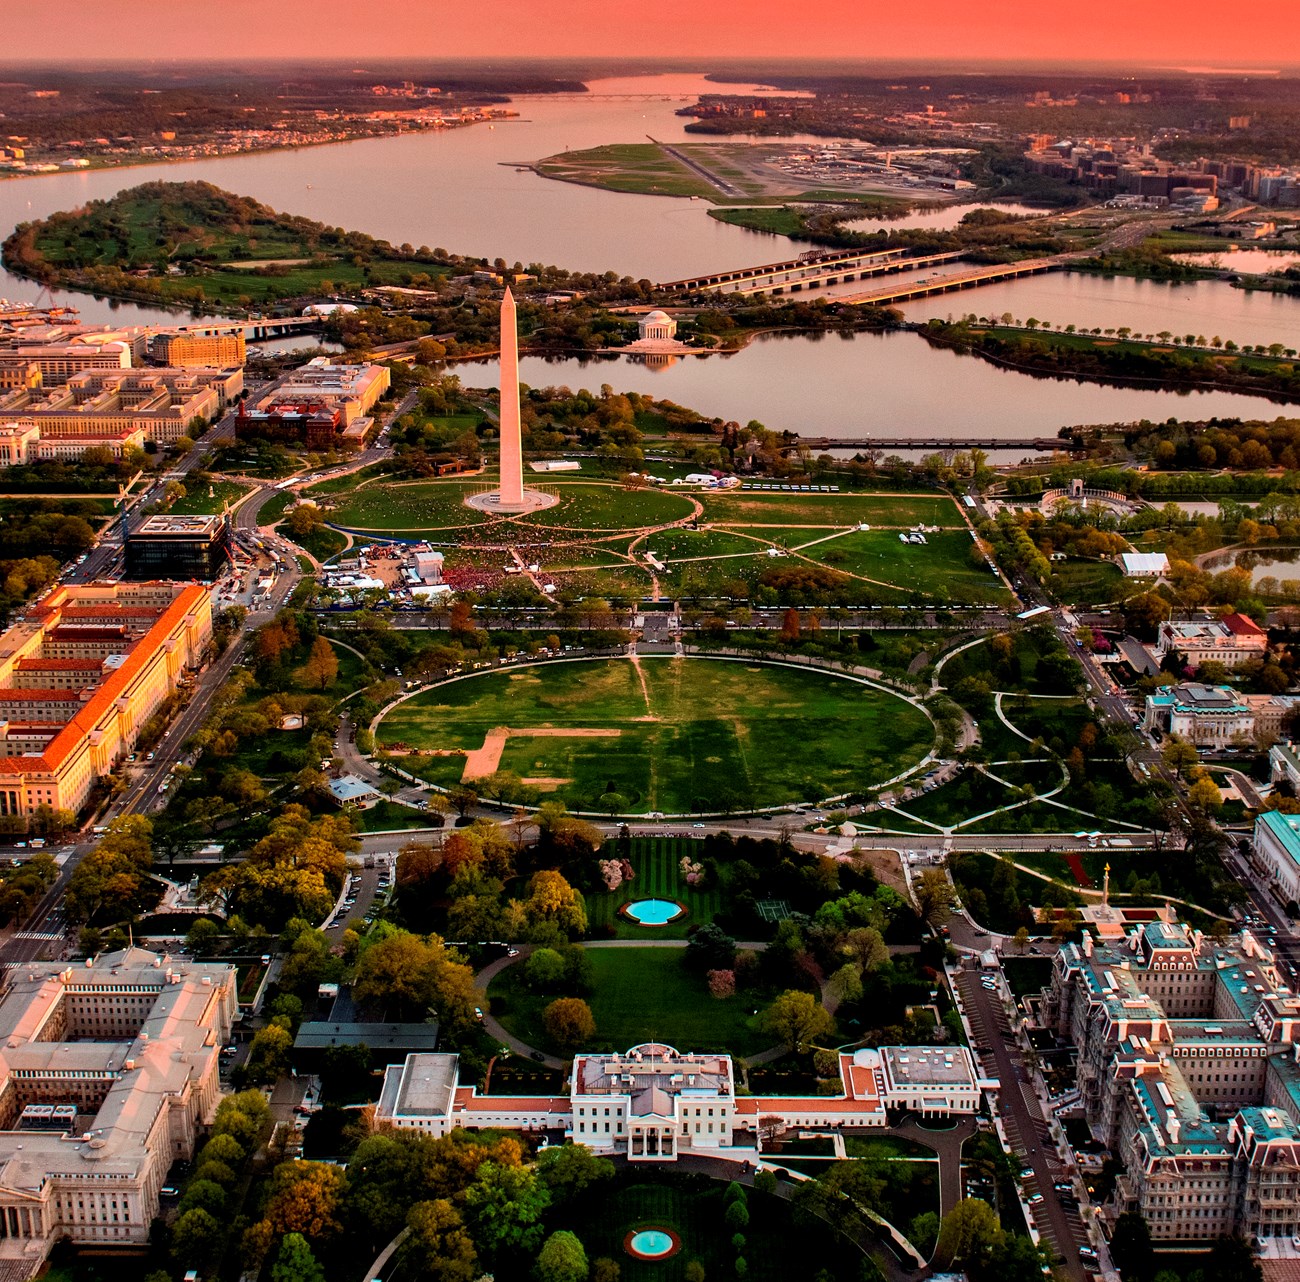 Aerial view of the National Mall from Lafayette park to the Washington Monument